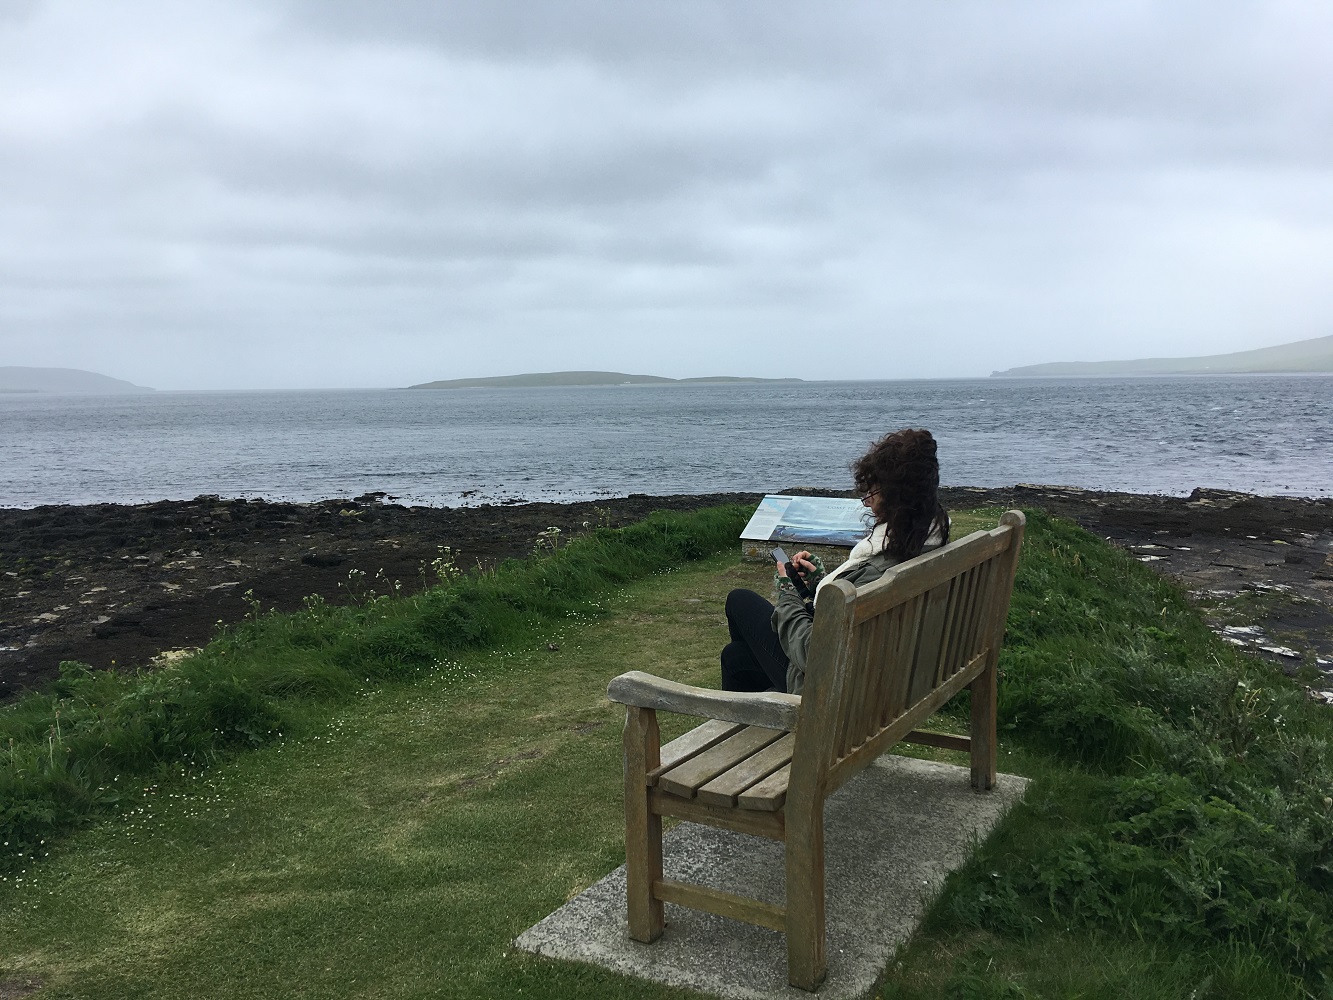 A mobile app is being created for Orkney